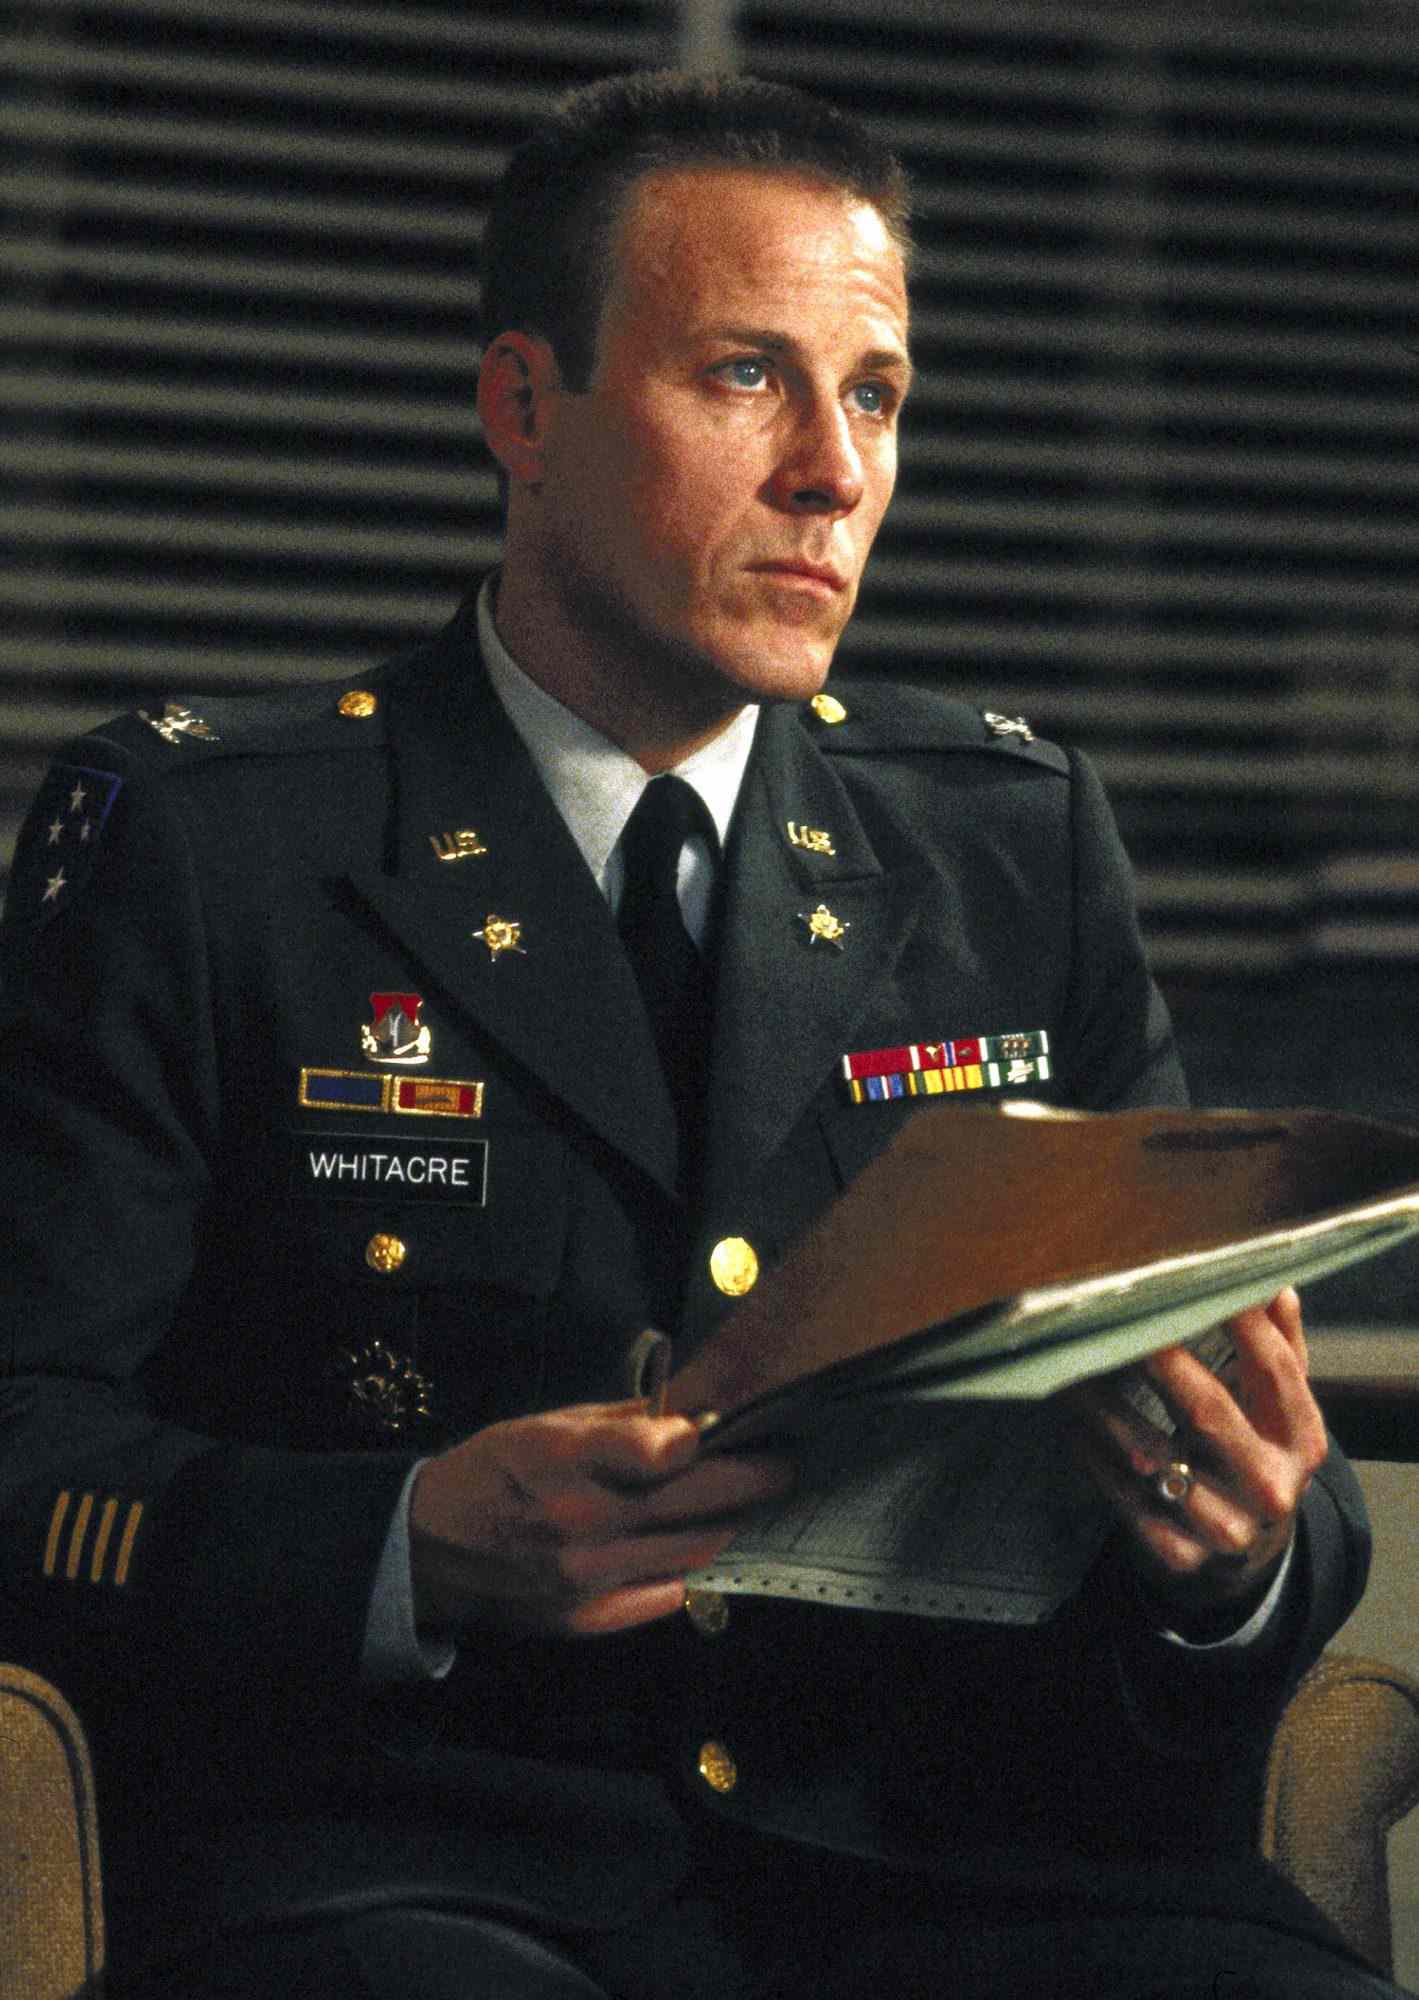 THE PACKAGE, John Heard, 1989, (c) Orion/courtesy Everett Collection